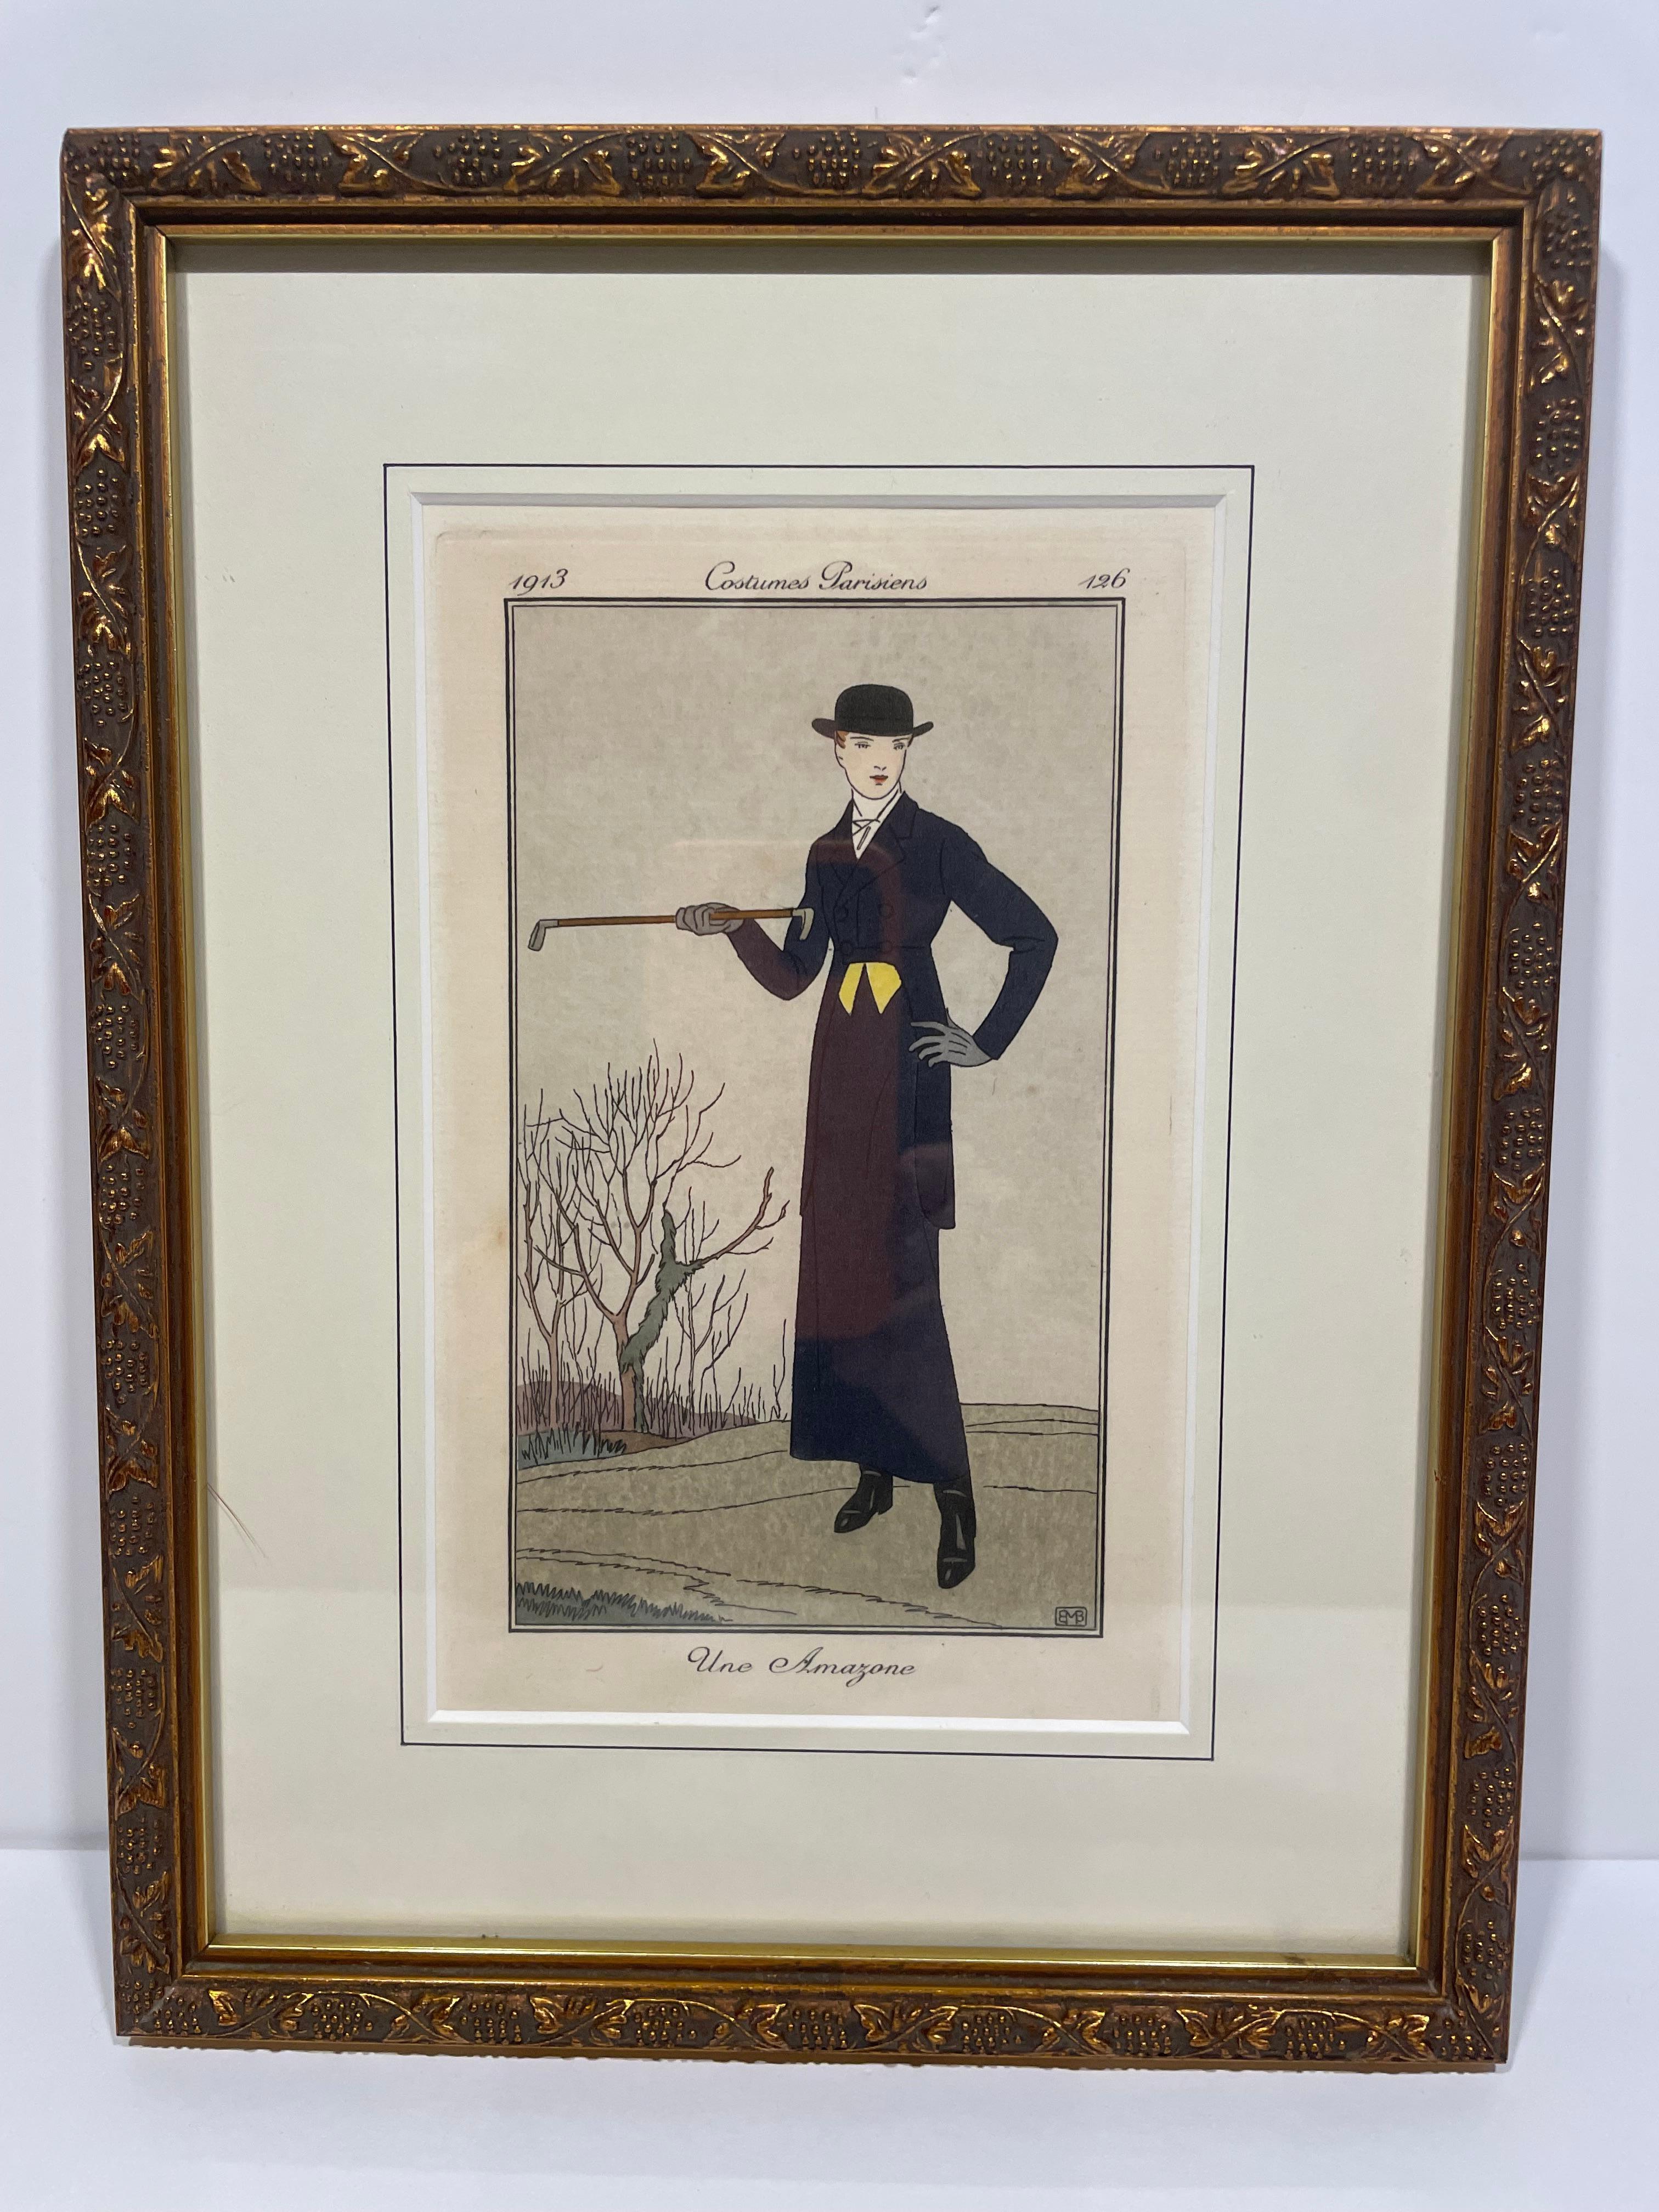 Three stunning and rare hand-painted French engravings depict Parisian couture at the height of the Belle Epoque and Art Nouveau Movement (1880-1914). Each composition also gives the viewer a glimpse at high-Parisian culture and lifestyle just